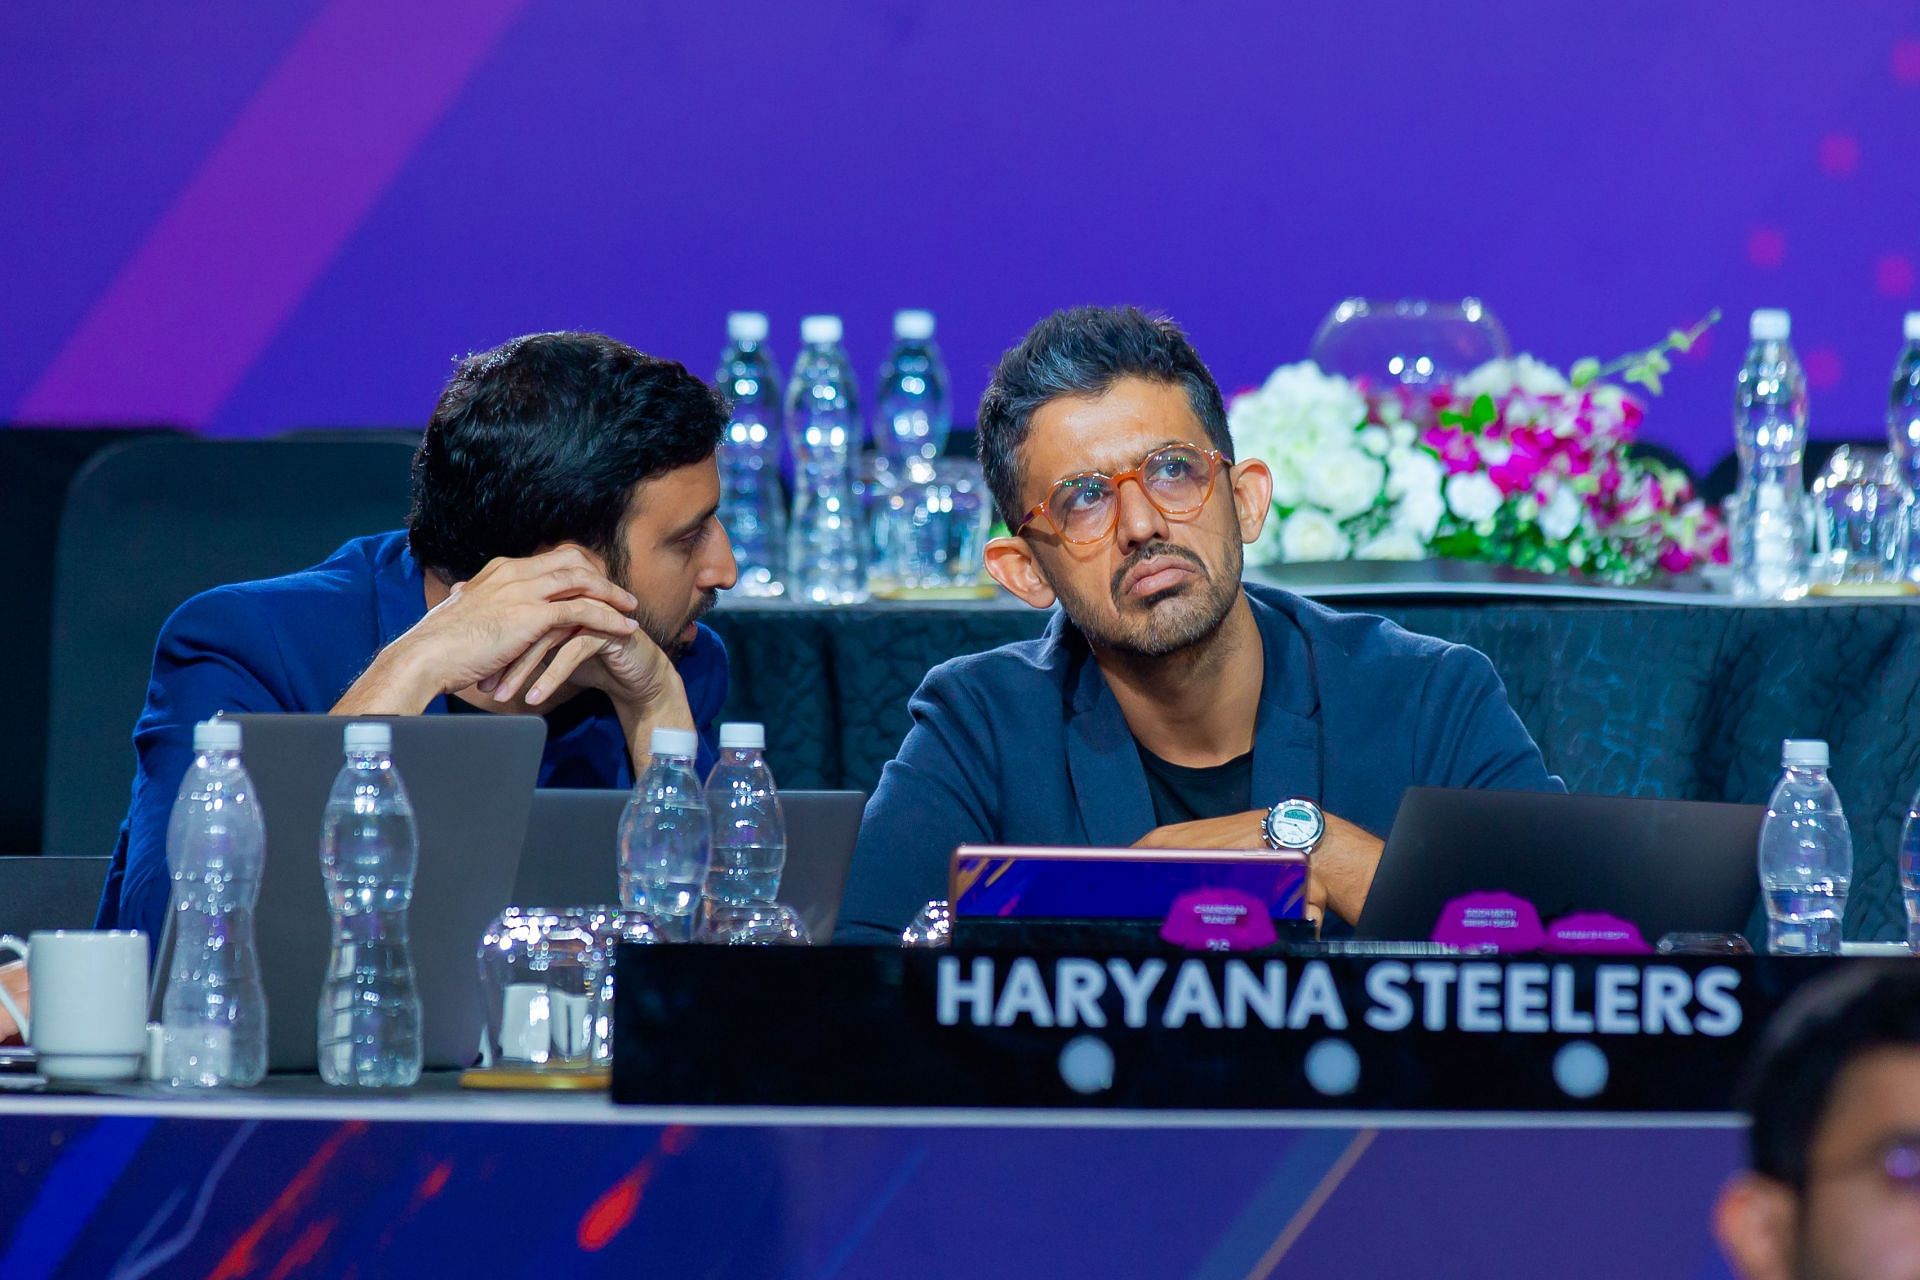 3 Most expensive buys for Haryana Steelers (Image Courtesy: PKL)